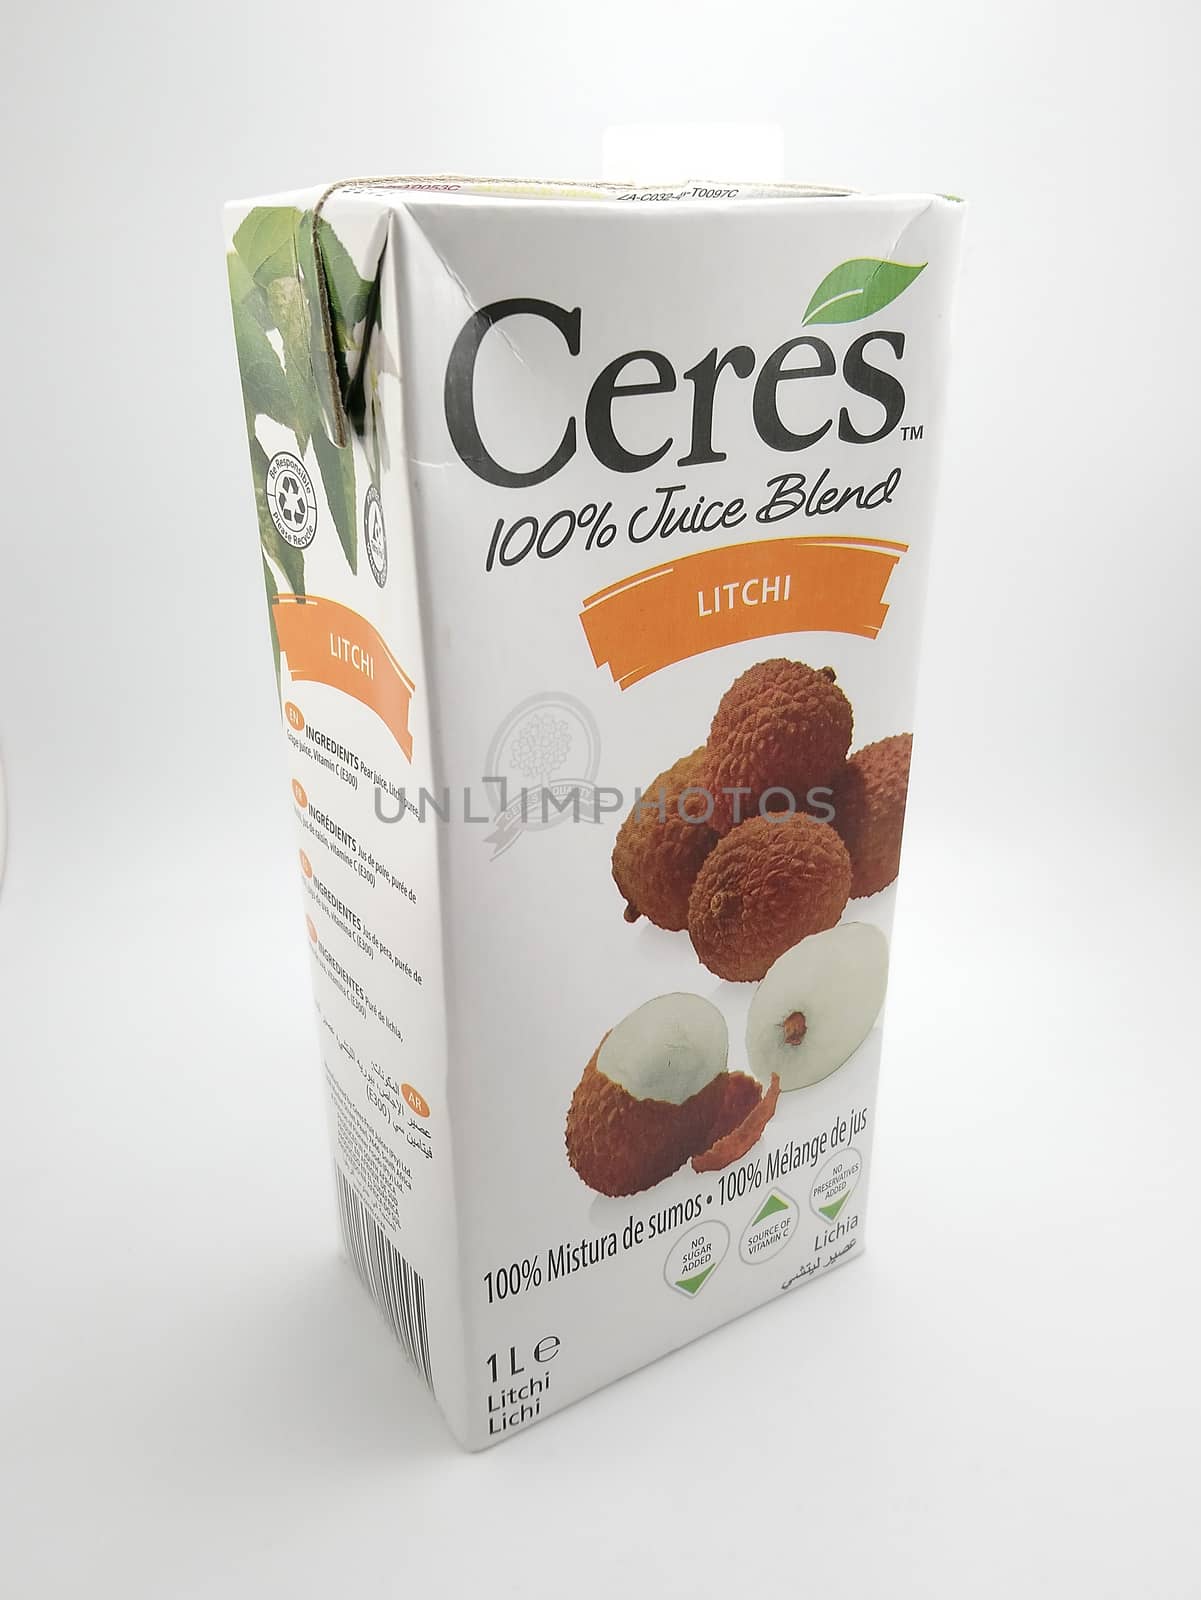 Ceres lychee juice in Manila, Philippines by imwaltersy